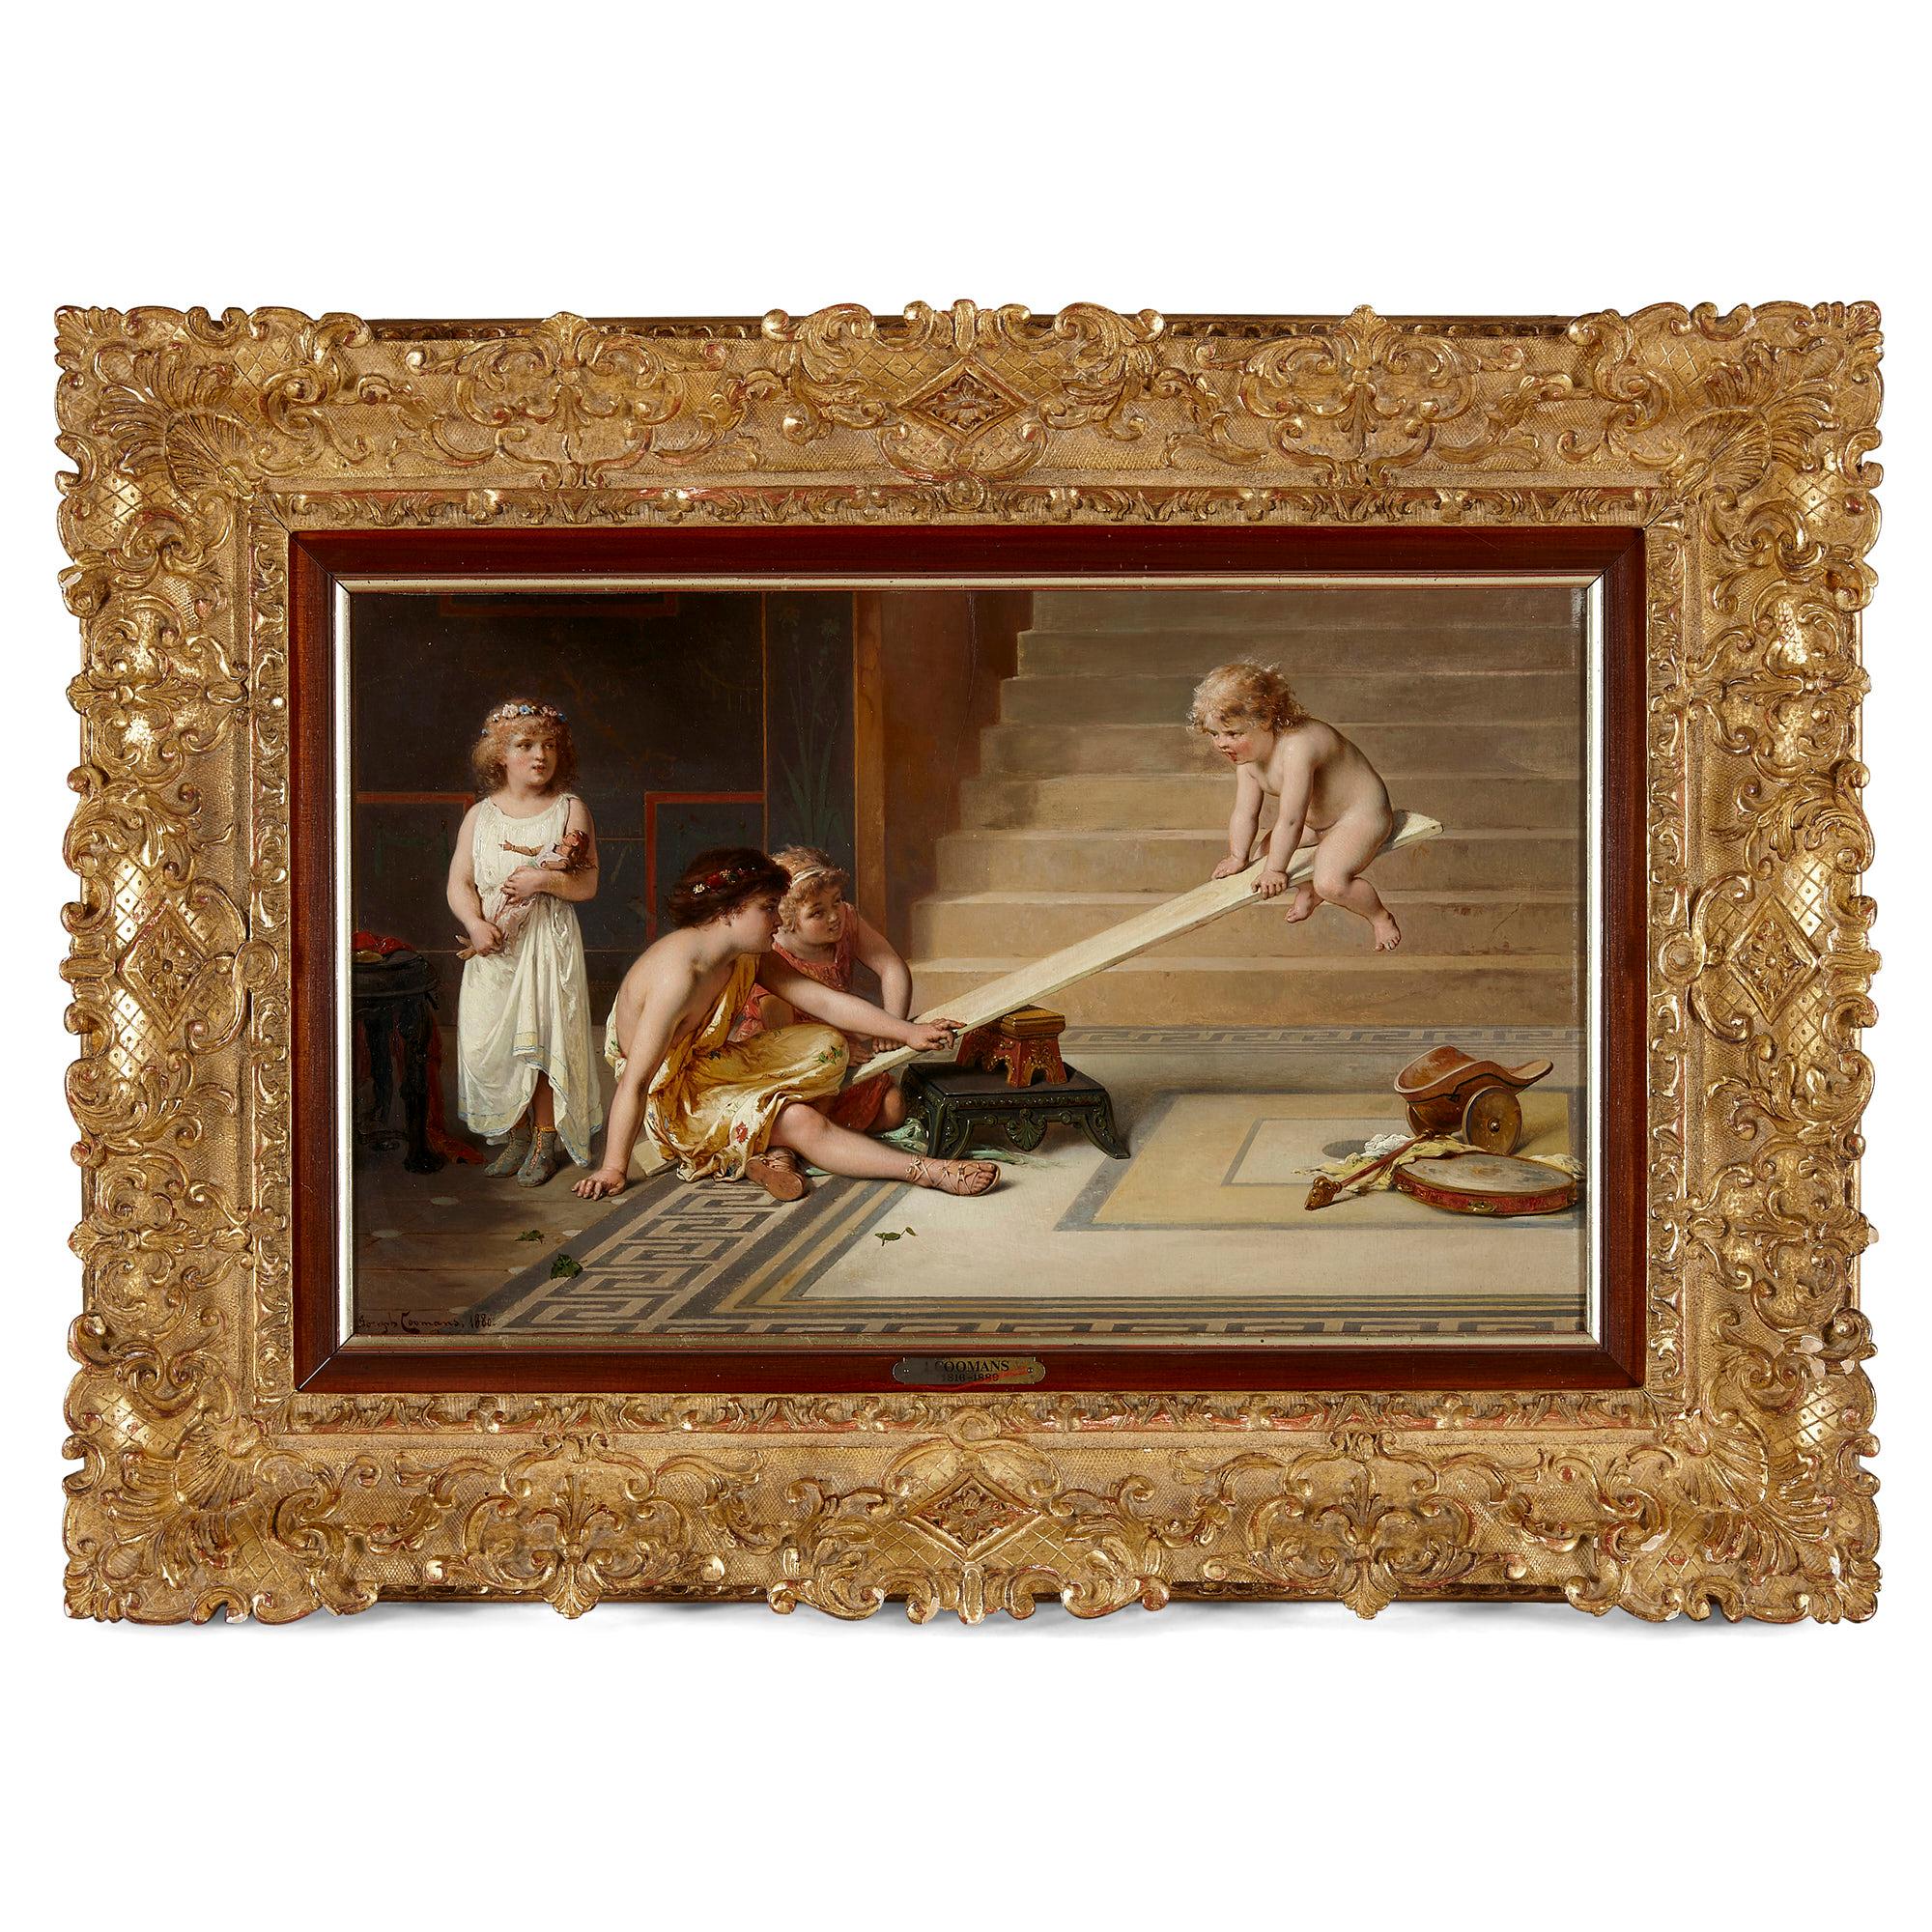 19th Century Academic Oil Painting 'Playing with the Seesaw' by Coomans